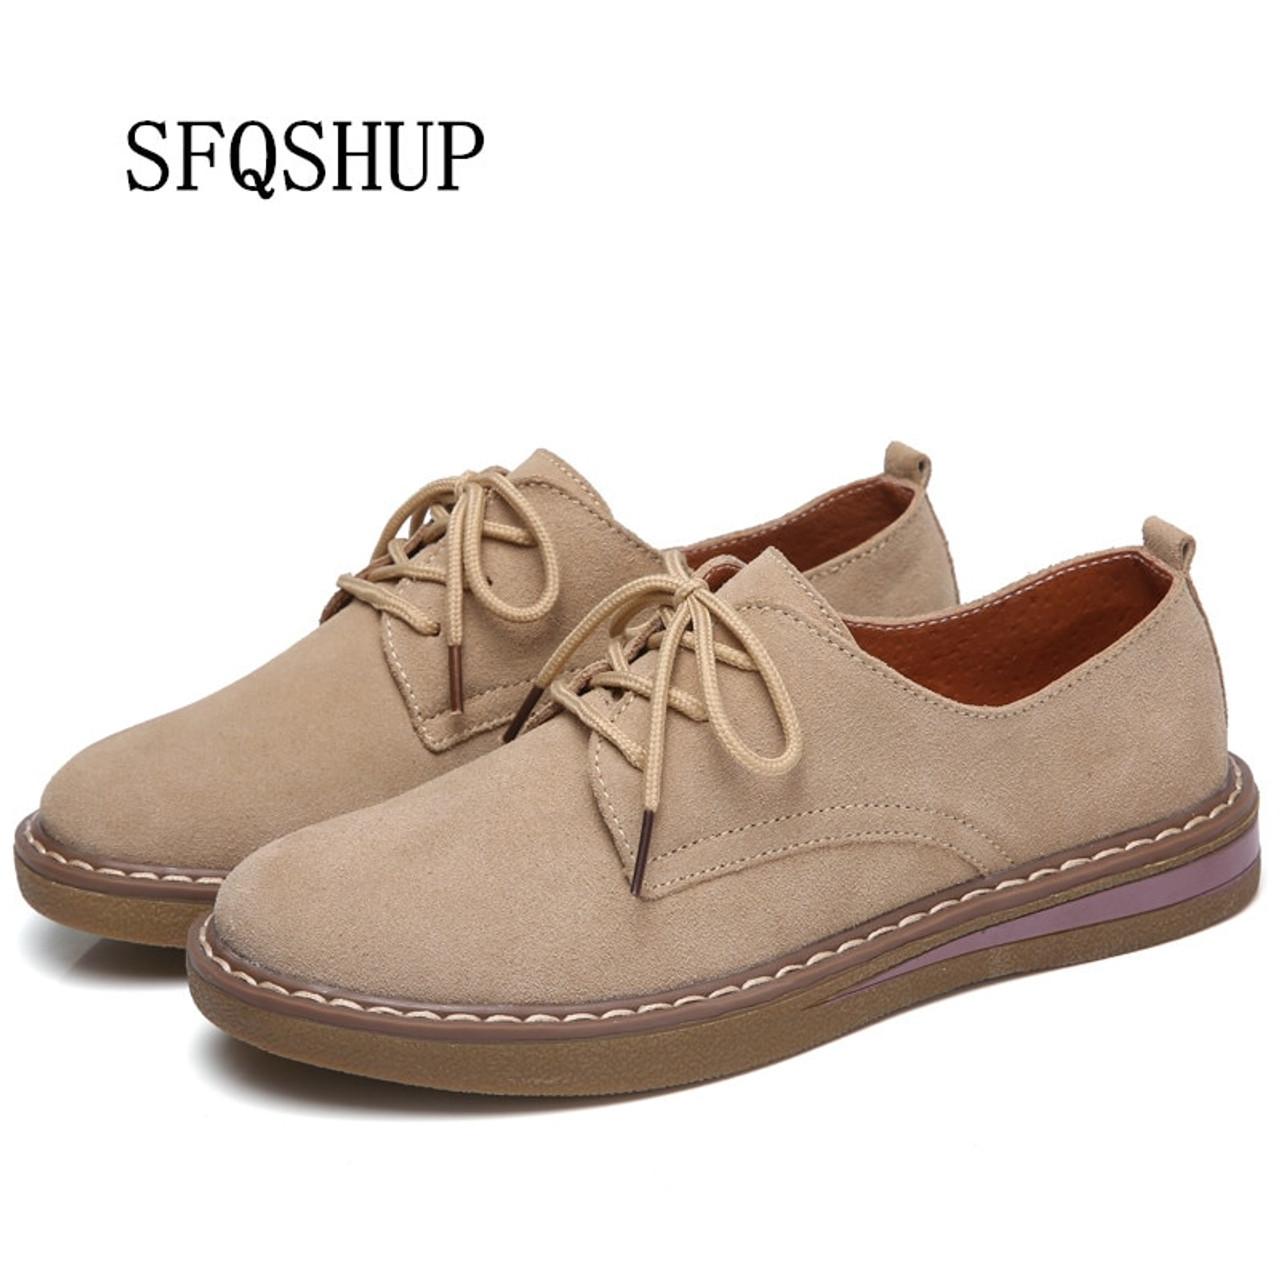 lace up casual shoes womens